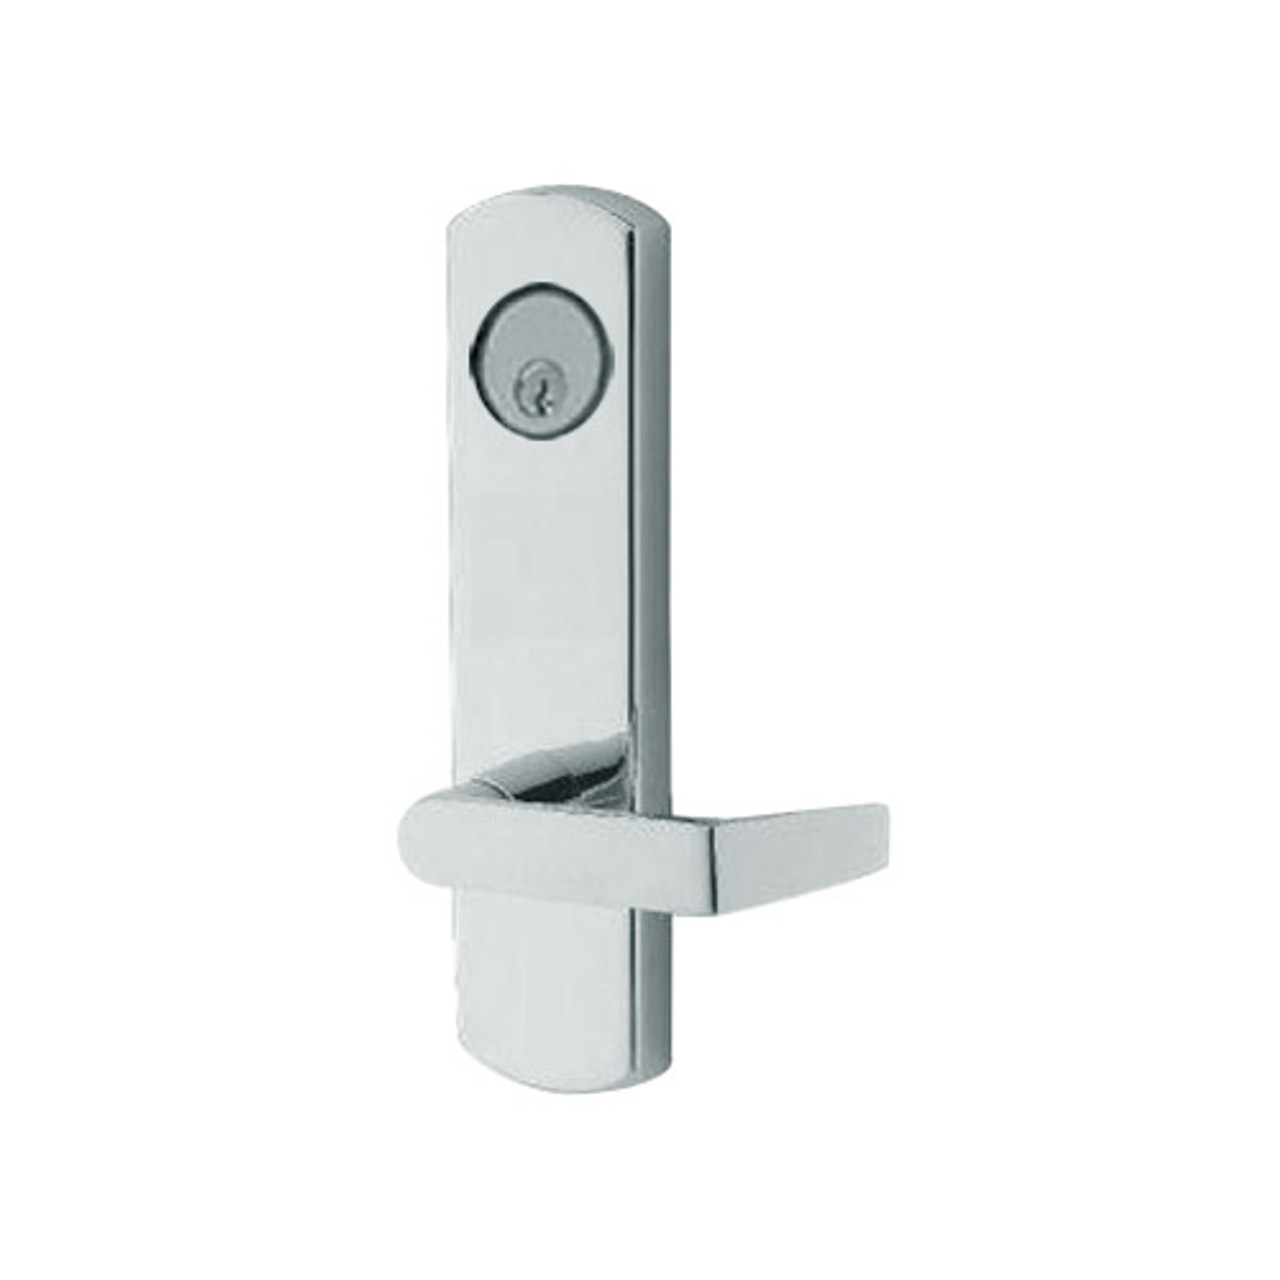 3080E-03-0-33-50 US32 Adams Rite Electrified Entry Trim with Square Lever in Bright Stainless Finish